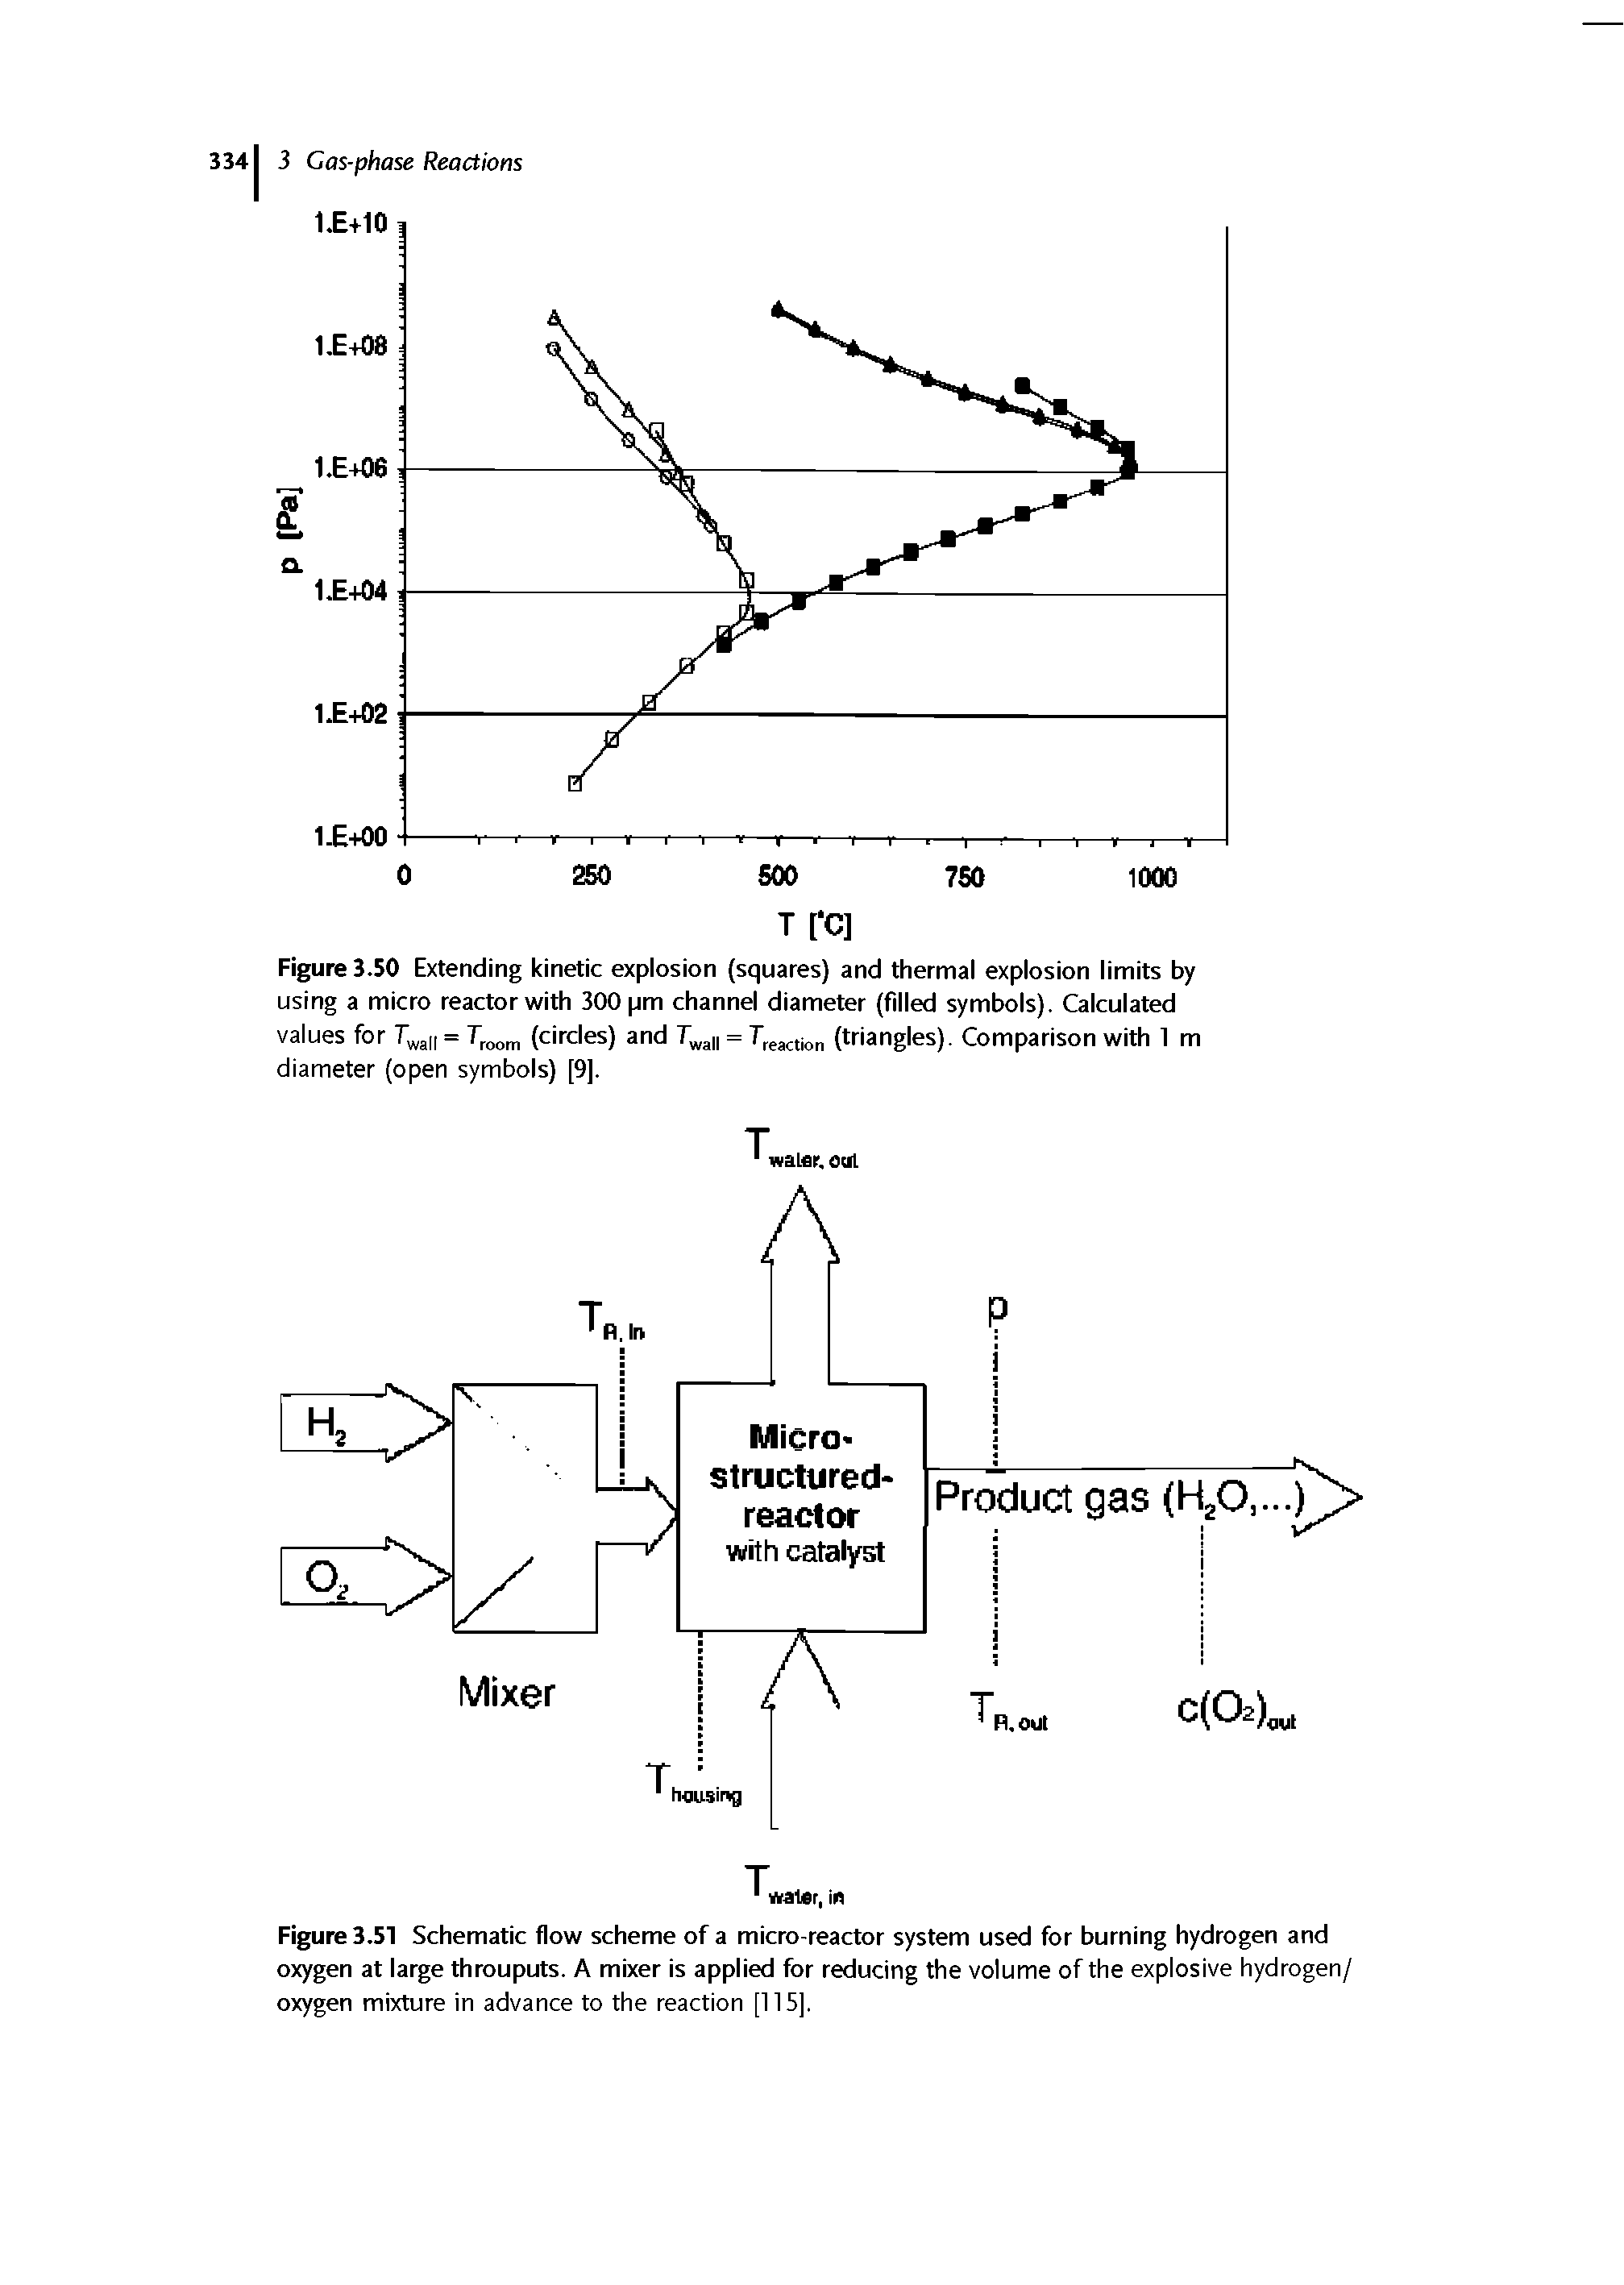 Figure 3.51 Schematic flow scheme of a micro-reactor system used for burning hydrogen and oxygen at large throuputs. A mixer is applied for reducing the volume of the explosive hydrogen/ oxygen mixture in advance to the reaction [115],...